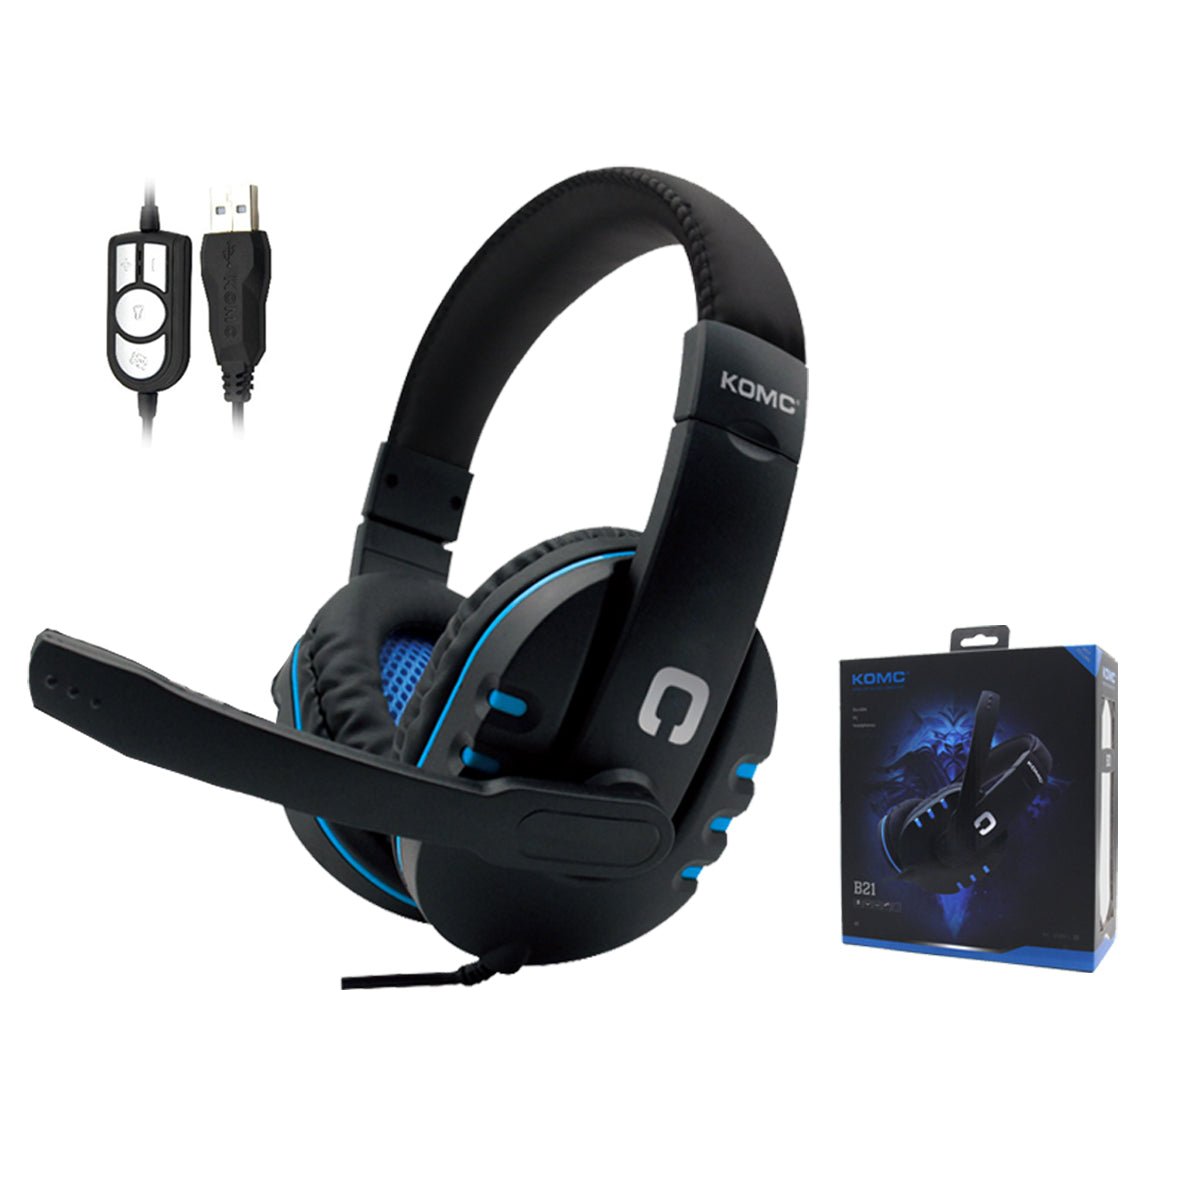 Shenzhen Top selling USB Gaming Headphones 7.1 Surround Sound Computer Earphones Games Headset with Microphone for PC Gamer | Electrr Inc